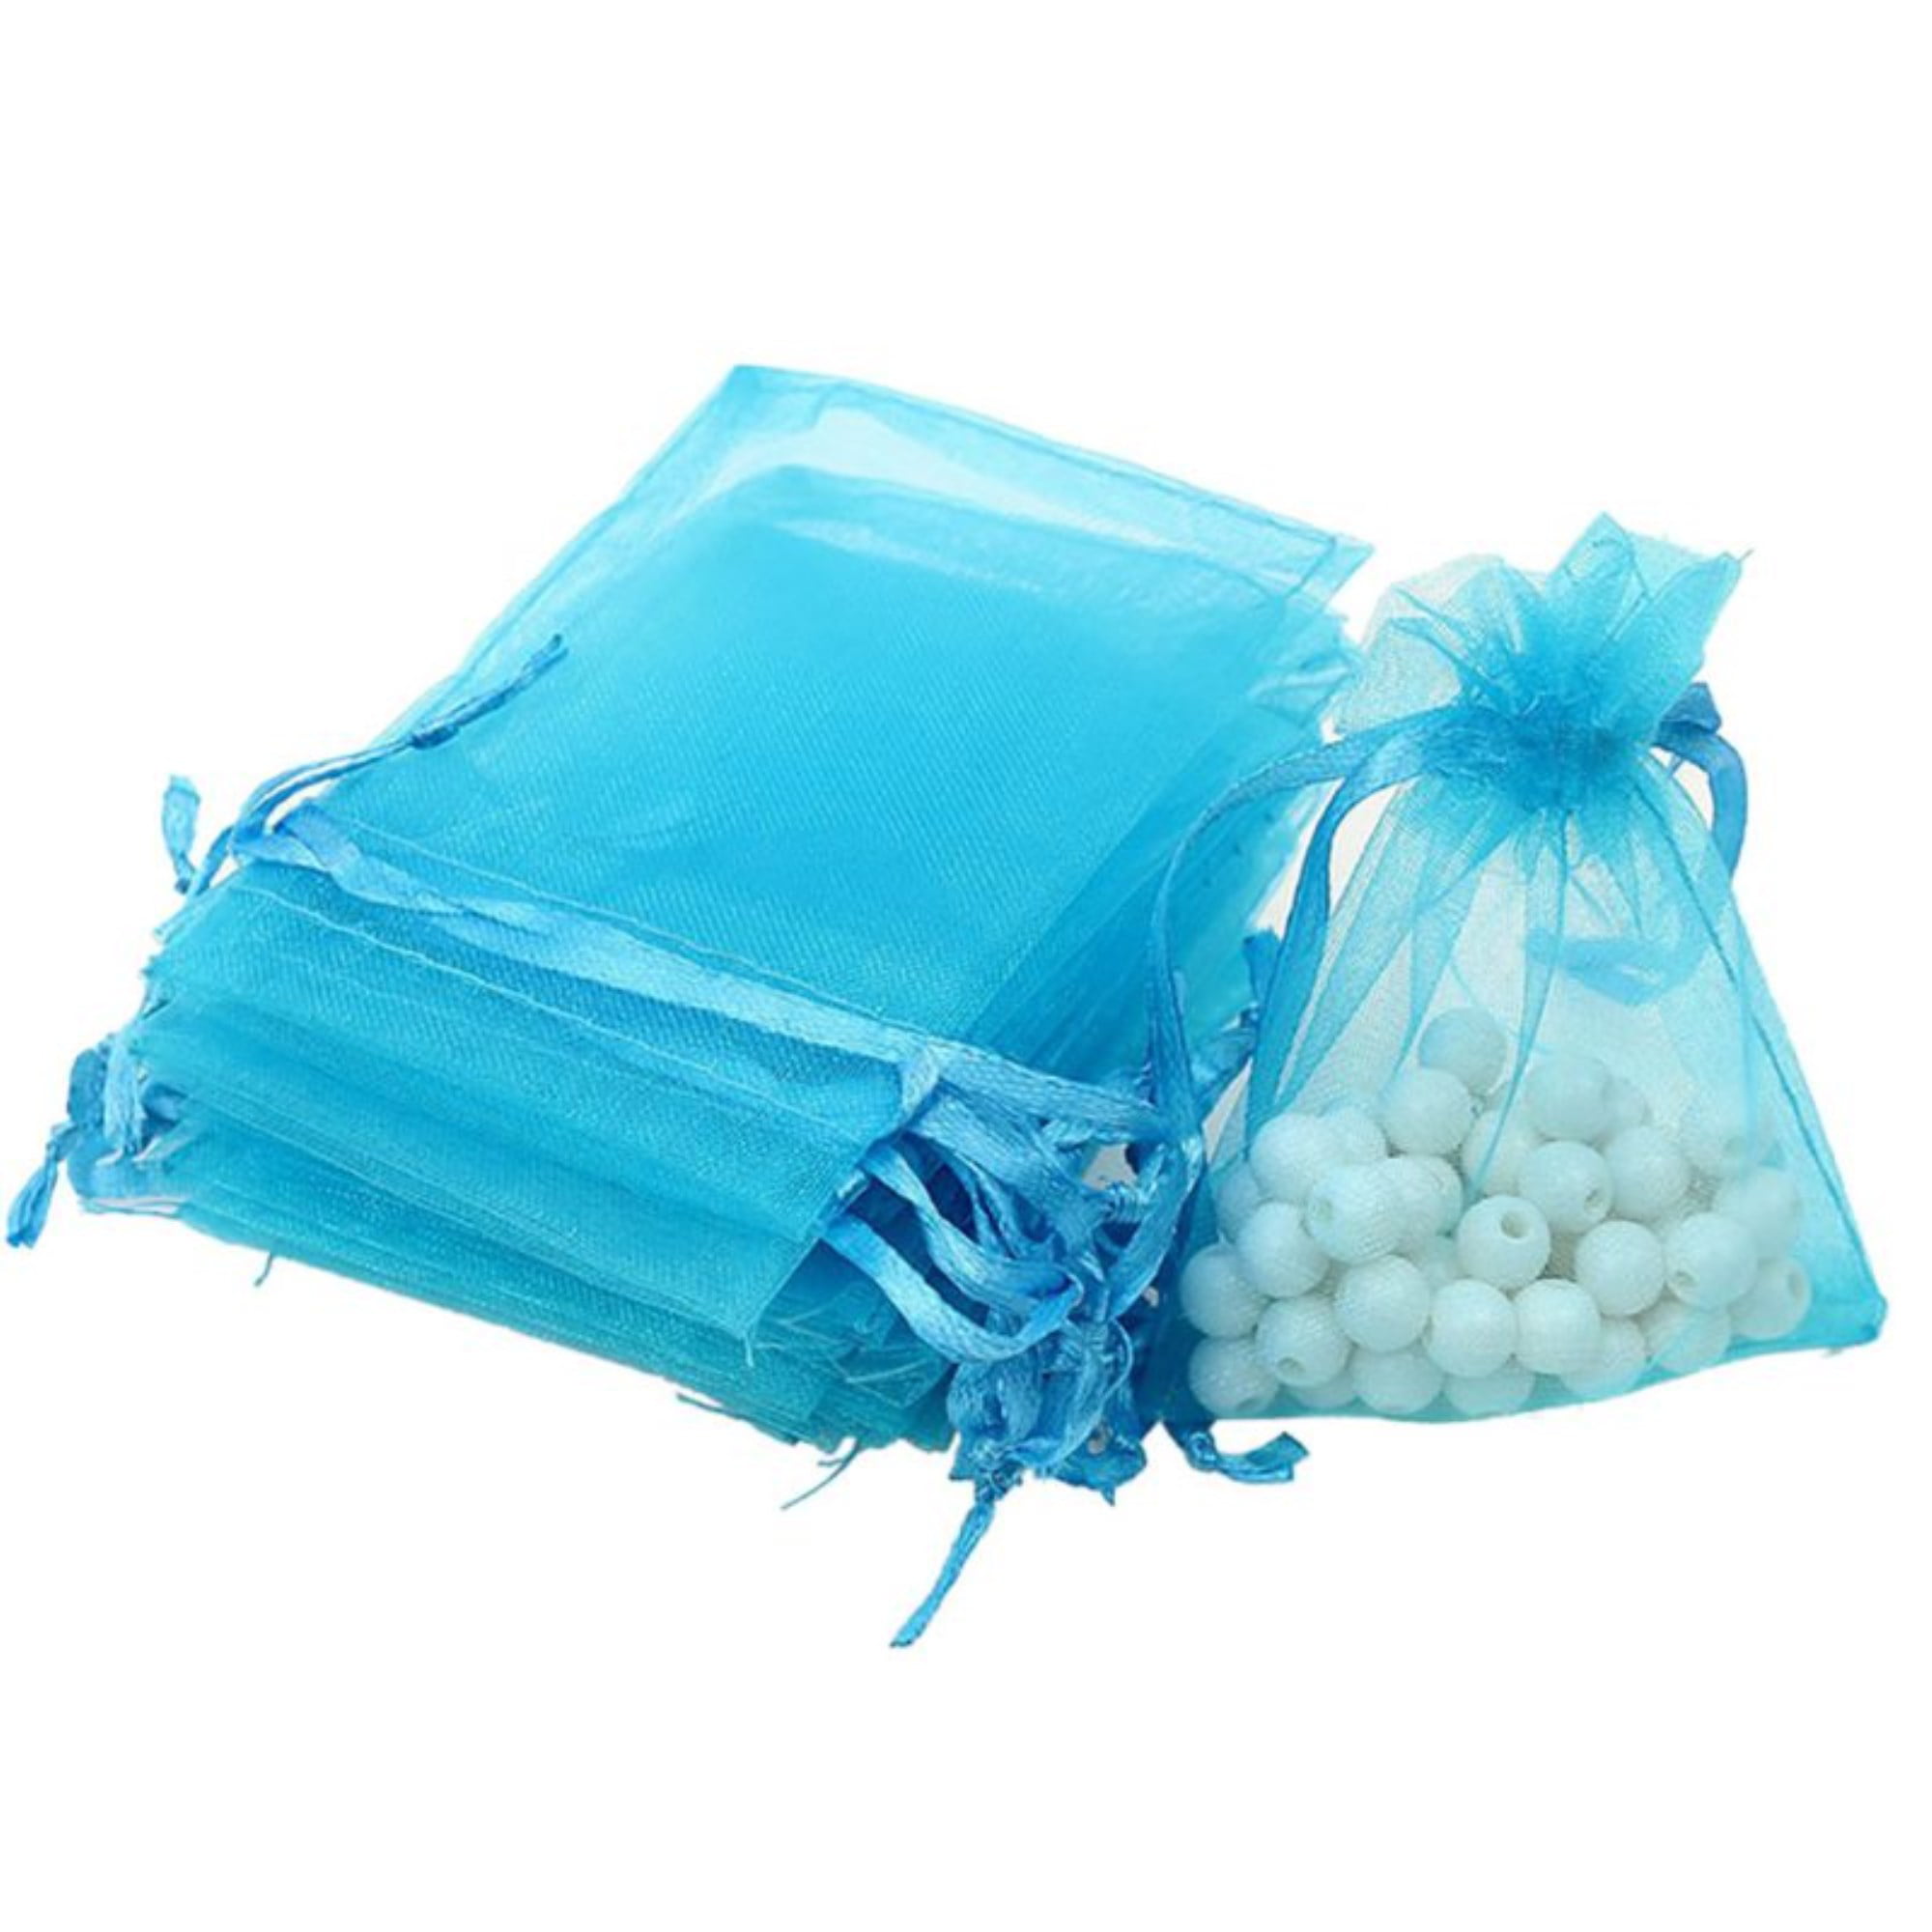 100x Organza Jewelry Candy Gift Pouch Bags Wedding Party Xmas Favors Decoration 